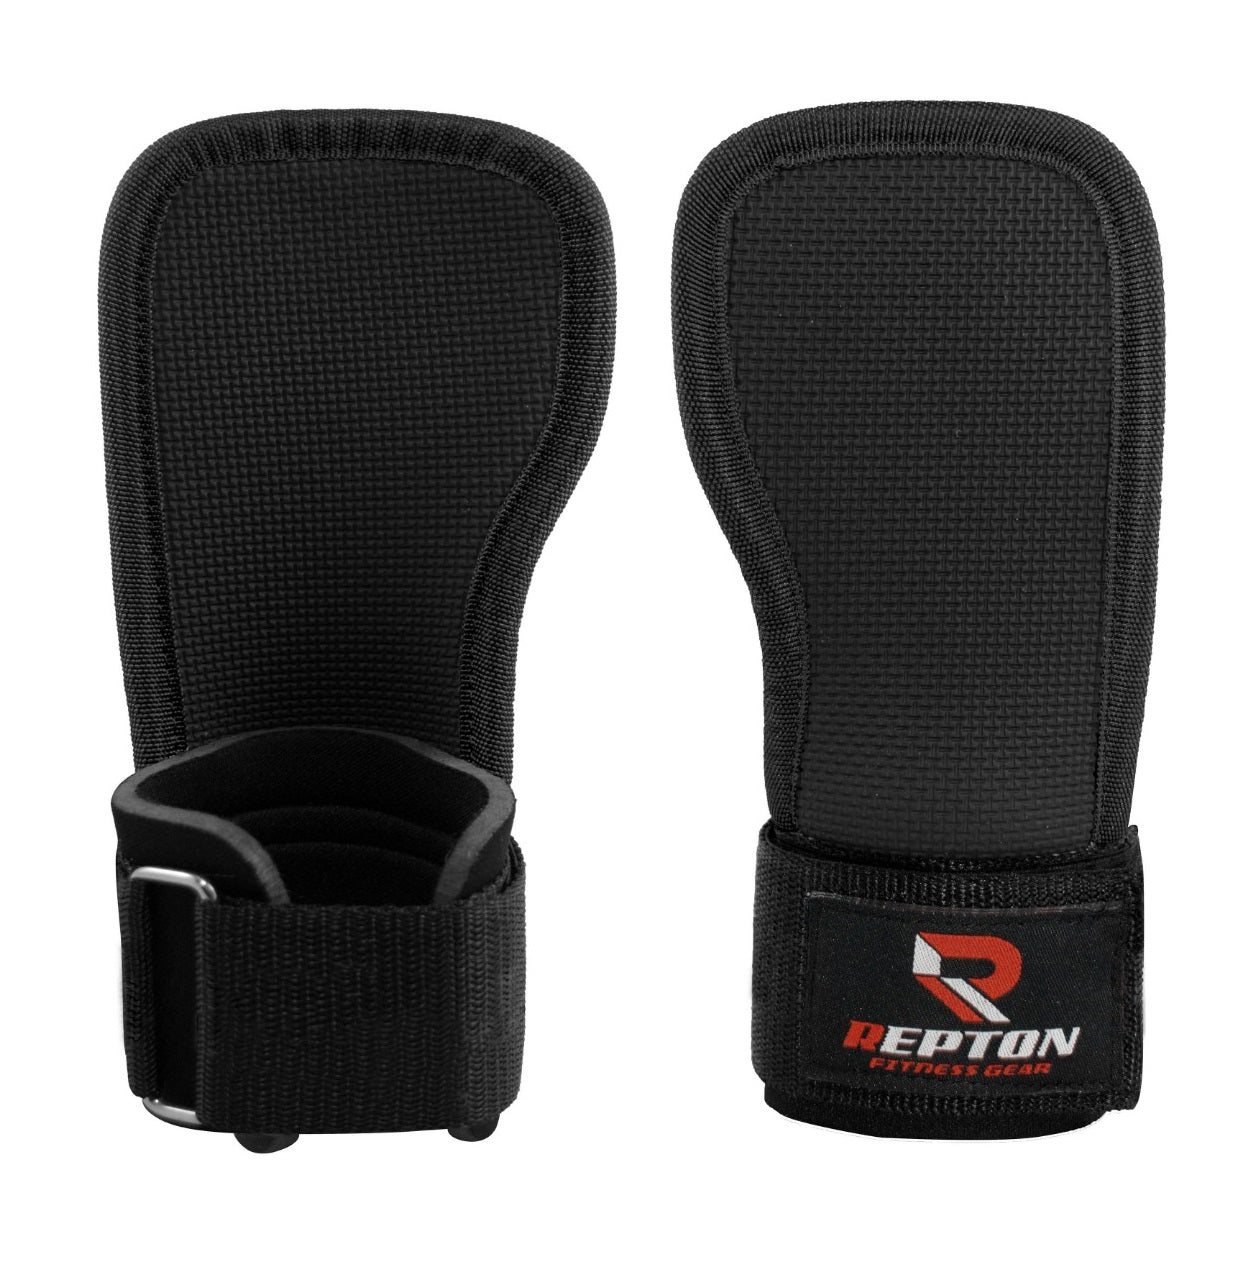 Weight Lifting Gym Palm Gel Pad Hand Grips Wrist Support Straps Training Gloves Repton Fitness Gear